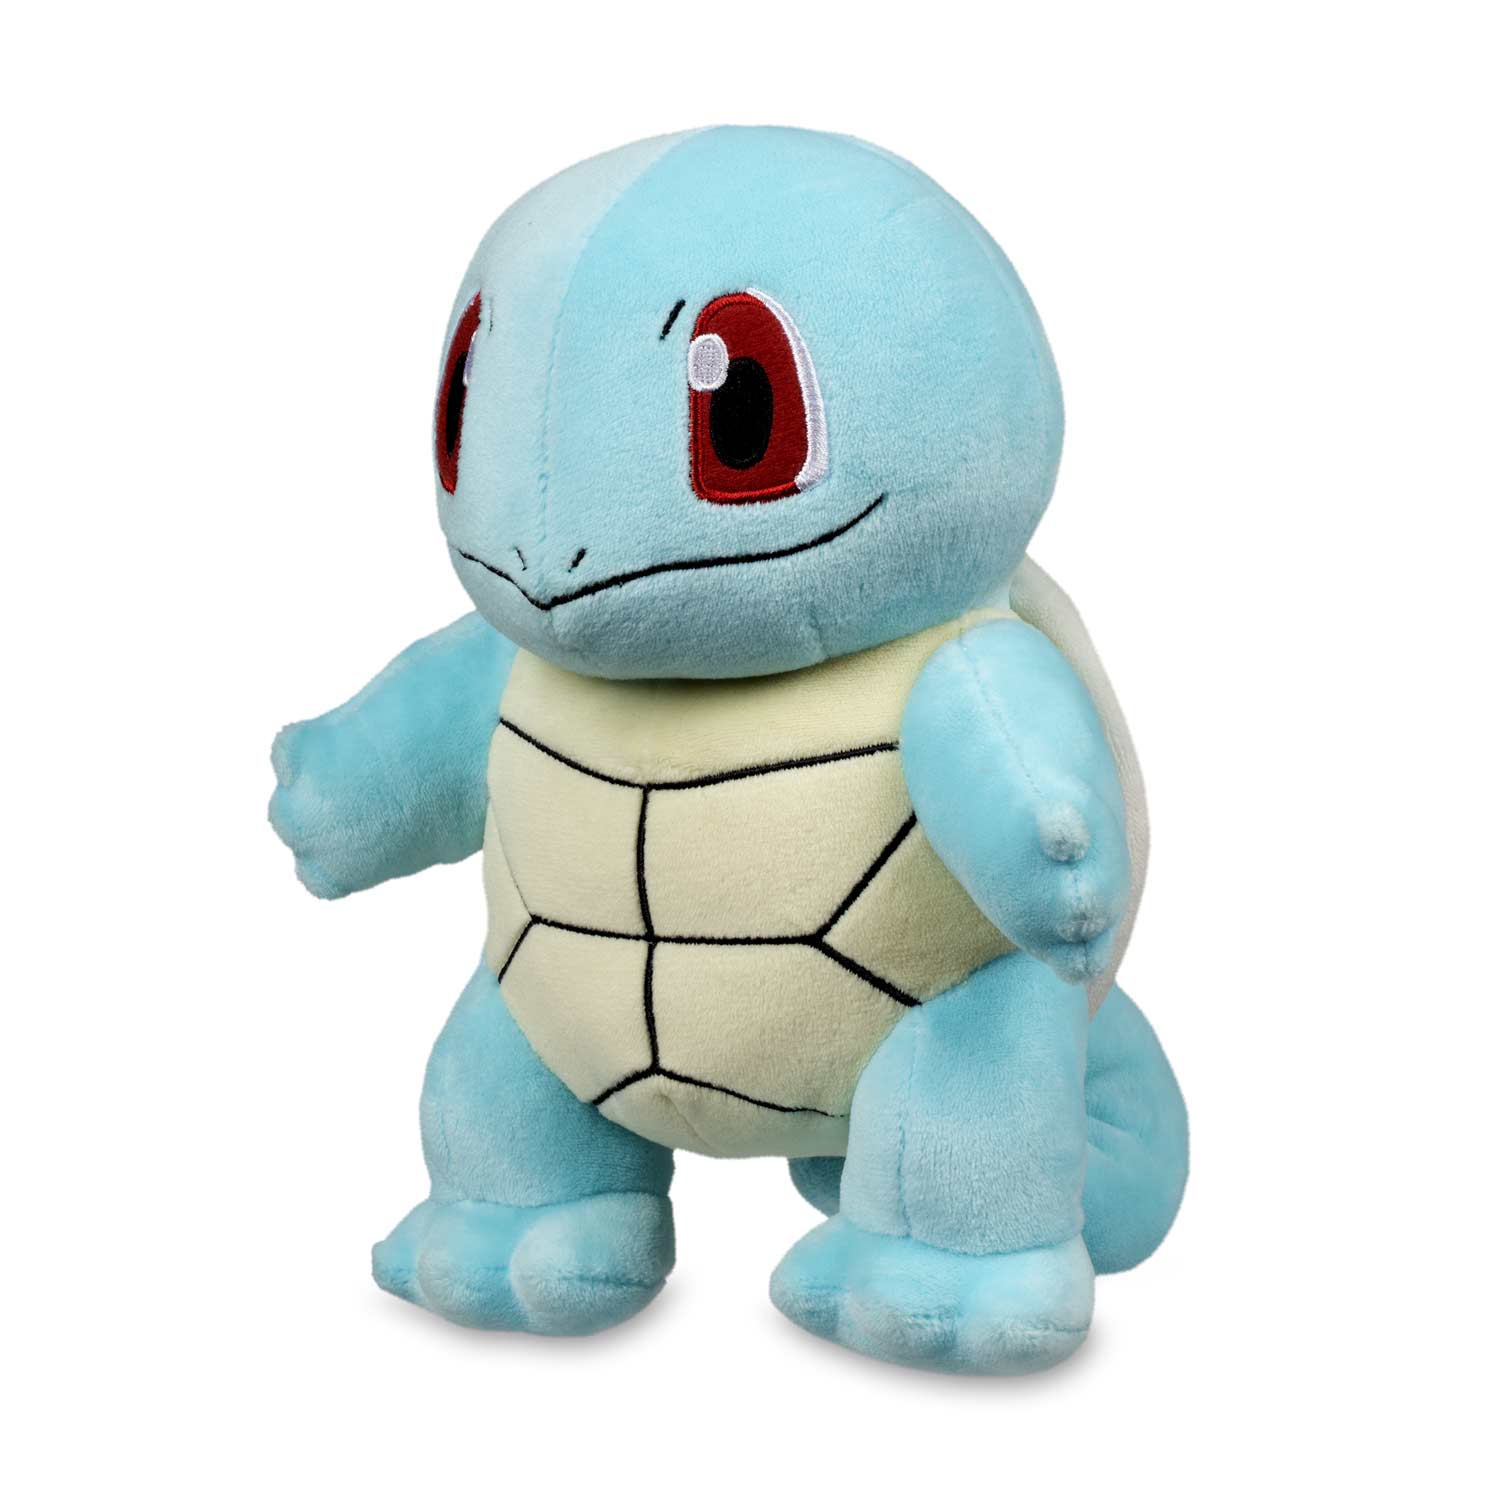 squirtle plush toy